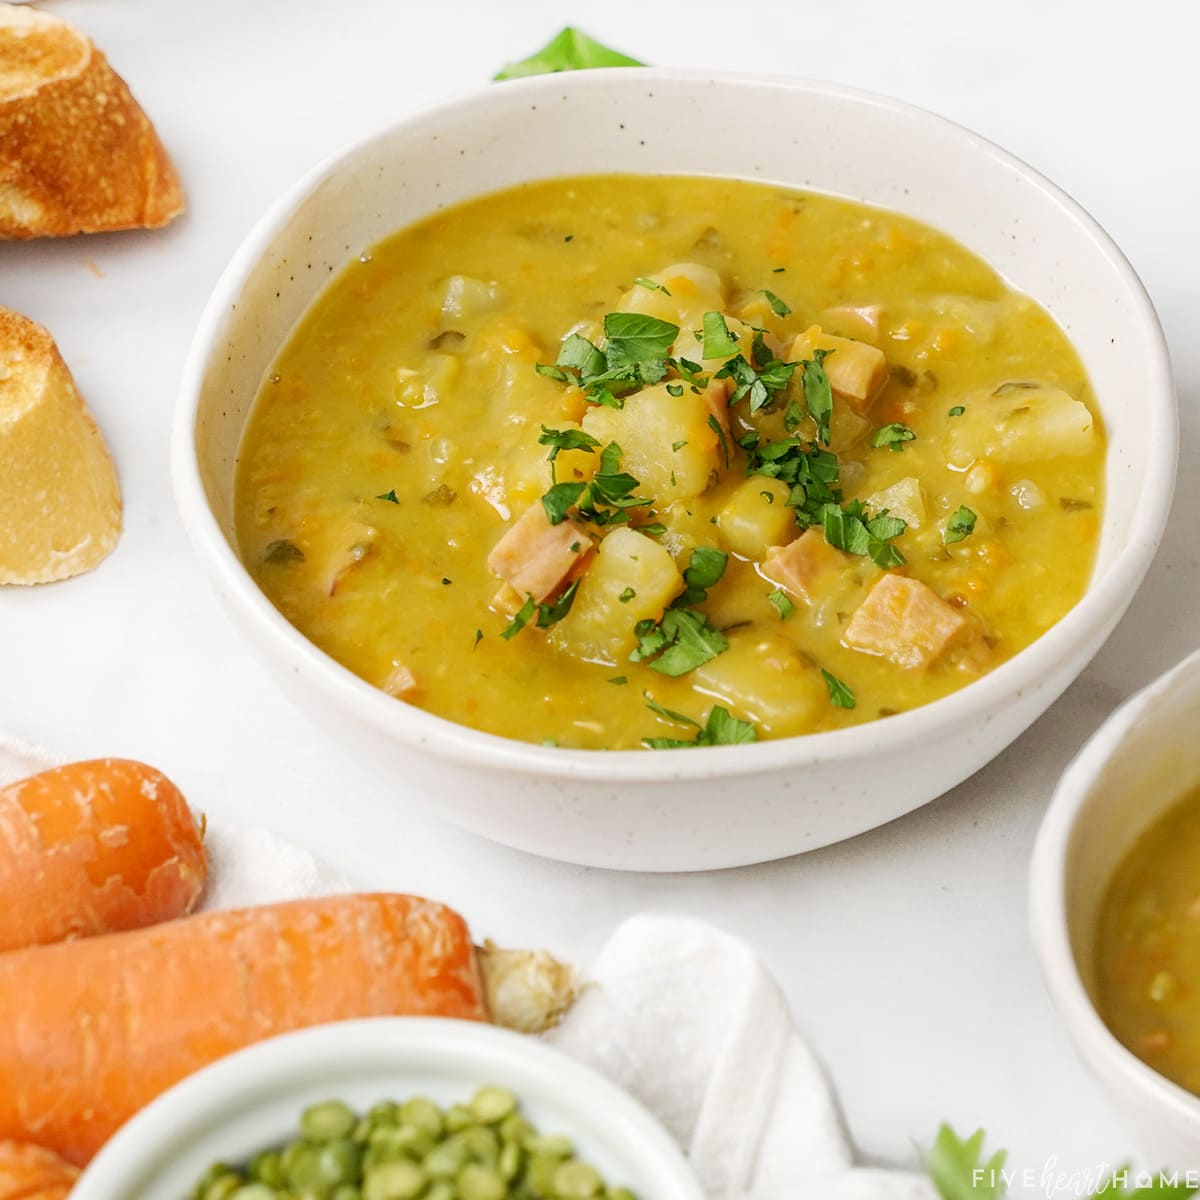 https://www.fivehearthome.com/wp-content/uploads/2022/10/Crockpot-Split-Pea-Soup-Recipe-by-Five-Heart-Home_1200pxFeatured-2.jpg